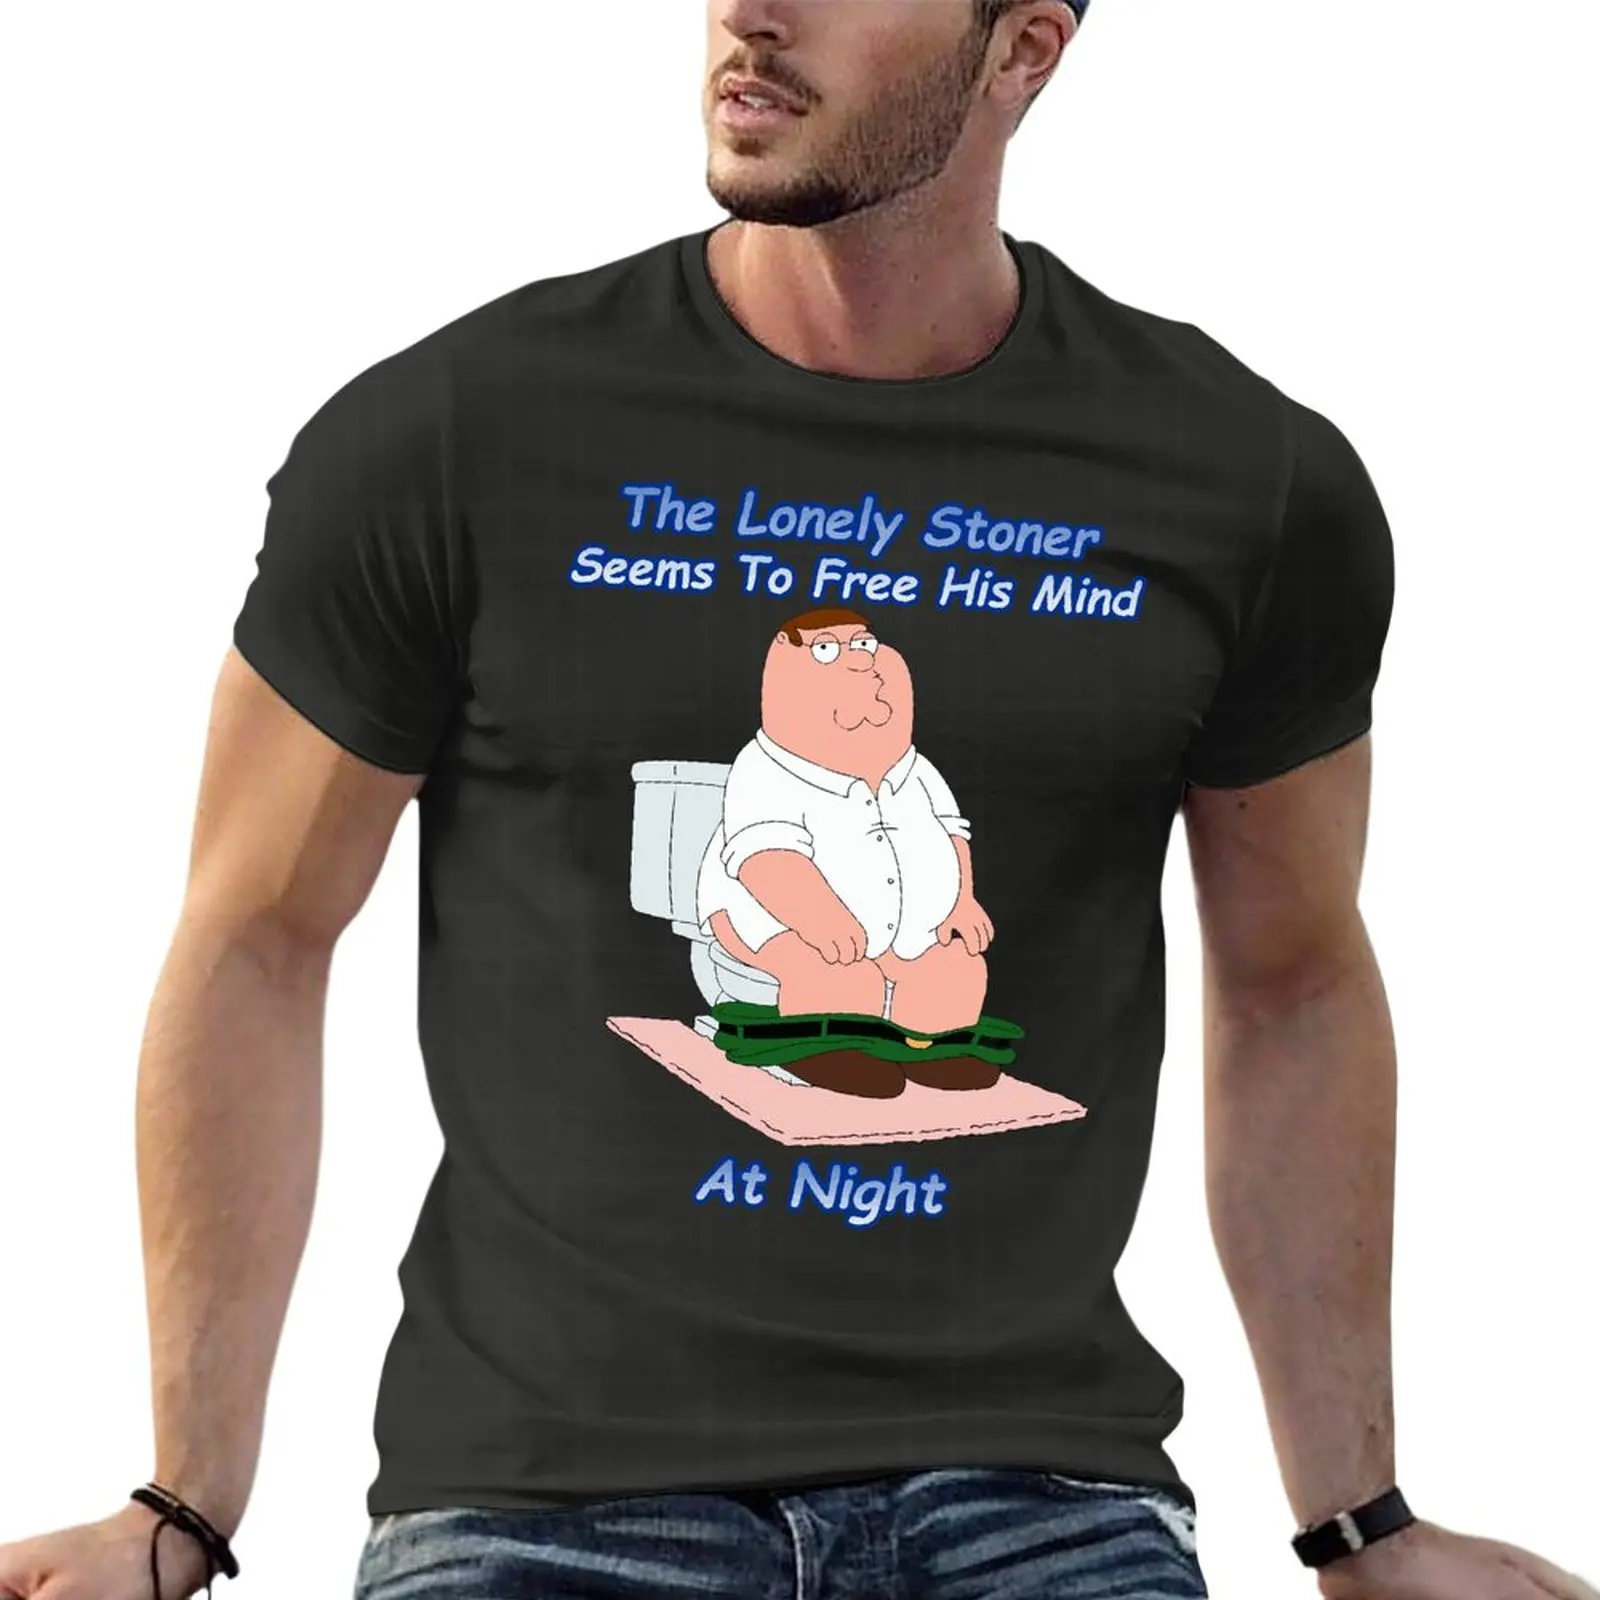 

The Lonely Stoner Seems To Free His Mind At Night Peter Griffin Versio Oversized T-Shirts Brand Men Clothing 100% Cotton Streetw